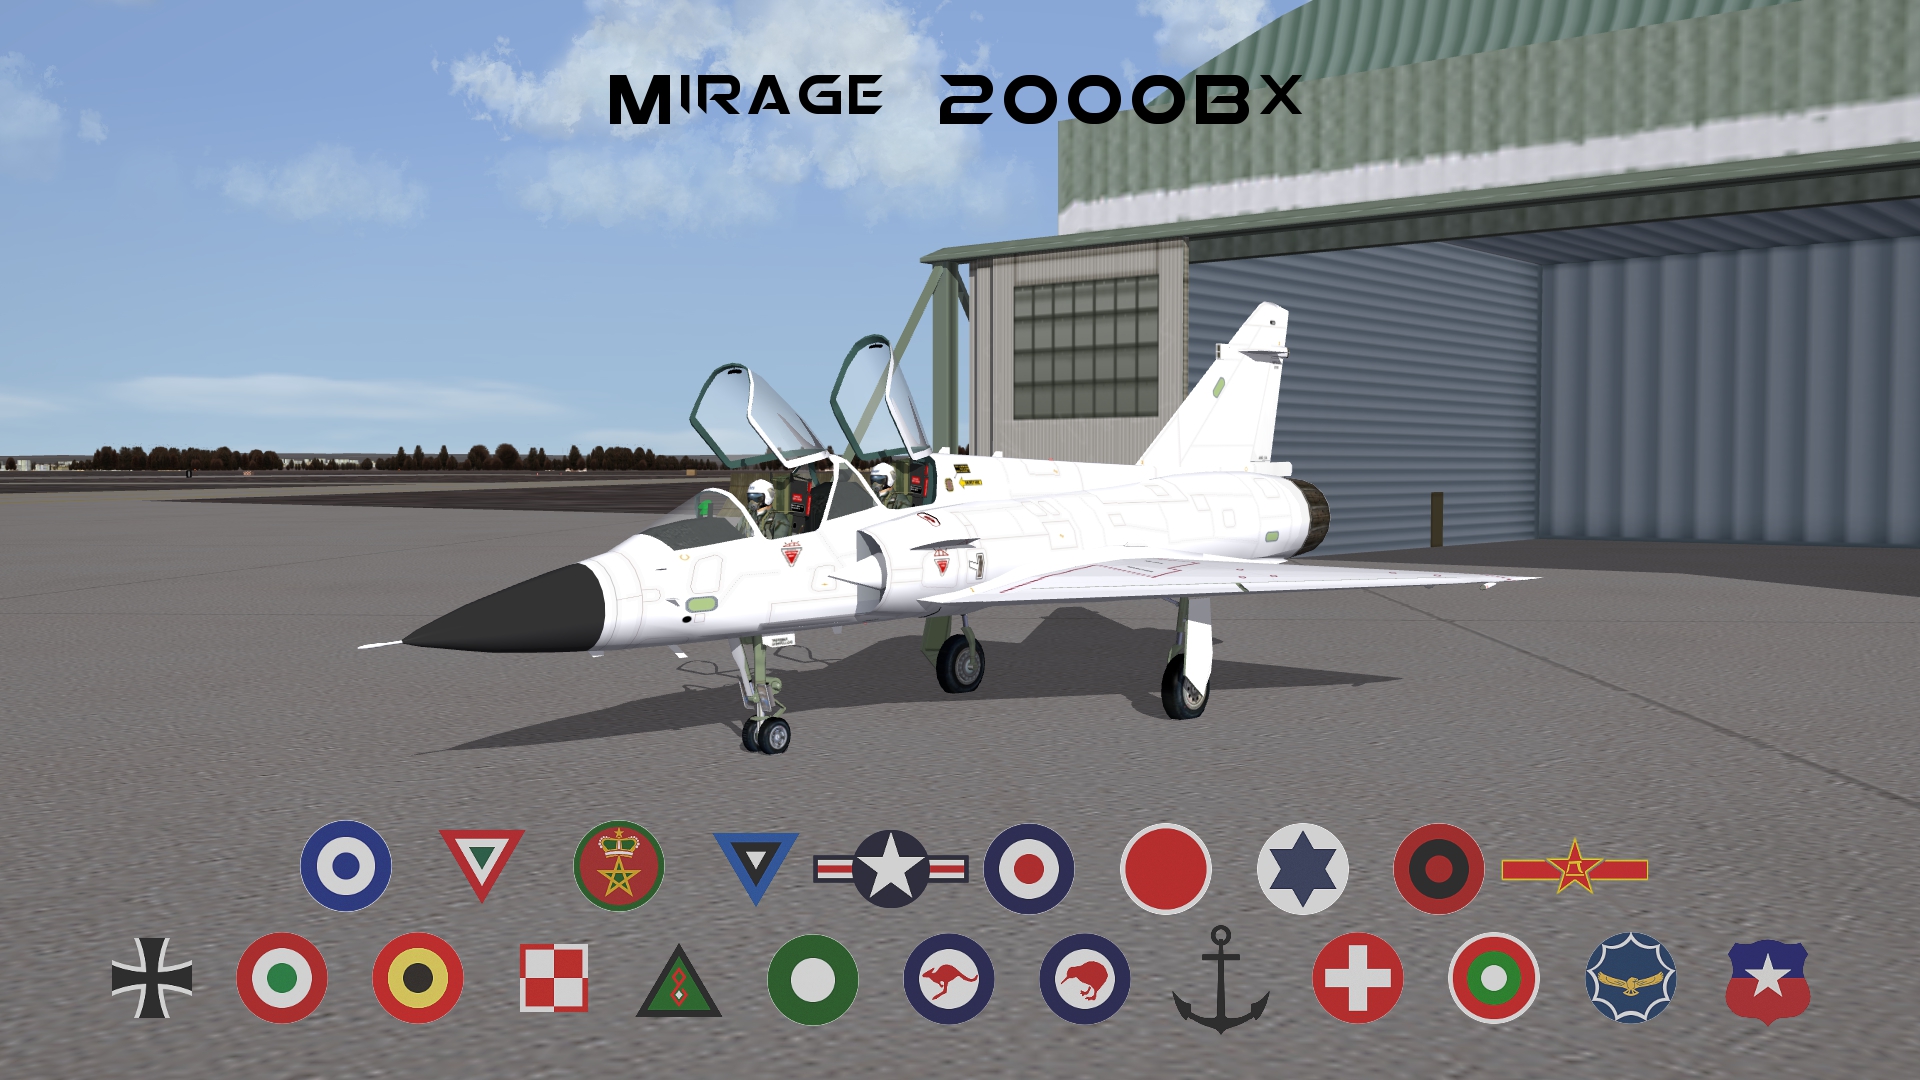 [Fictional] Mirage 2000Bx Megapack for SF2